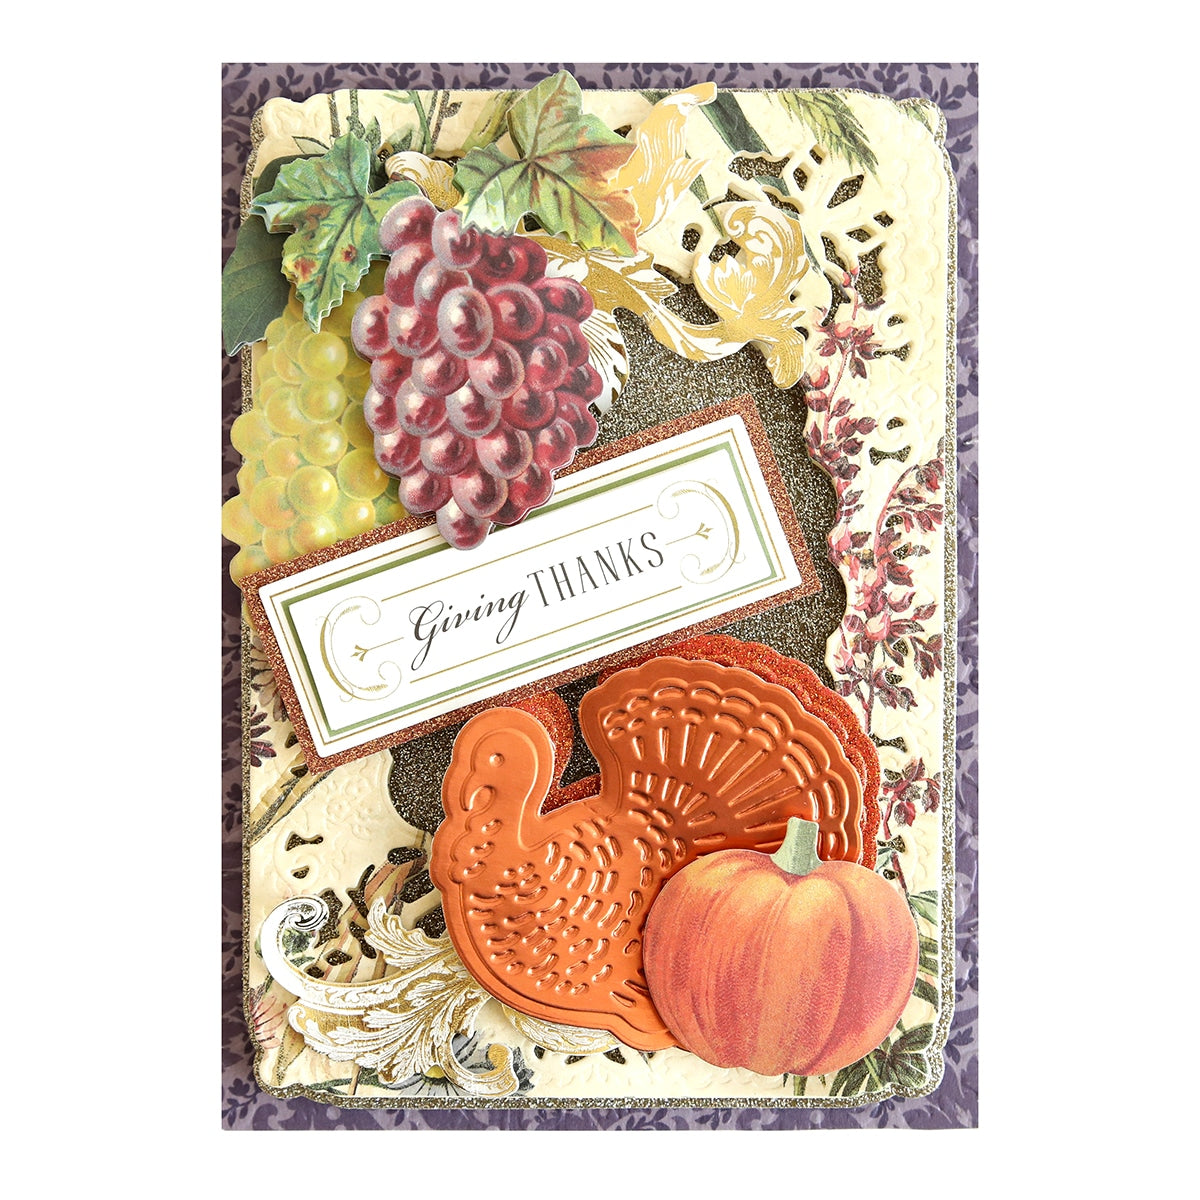 A Halloween 12x12 Glitter Cardstock with a turkey and grapes.